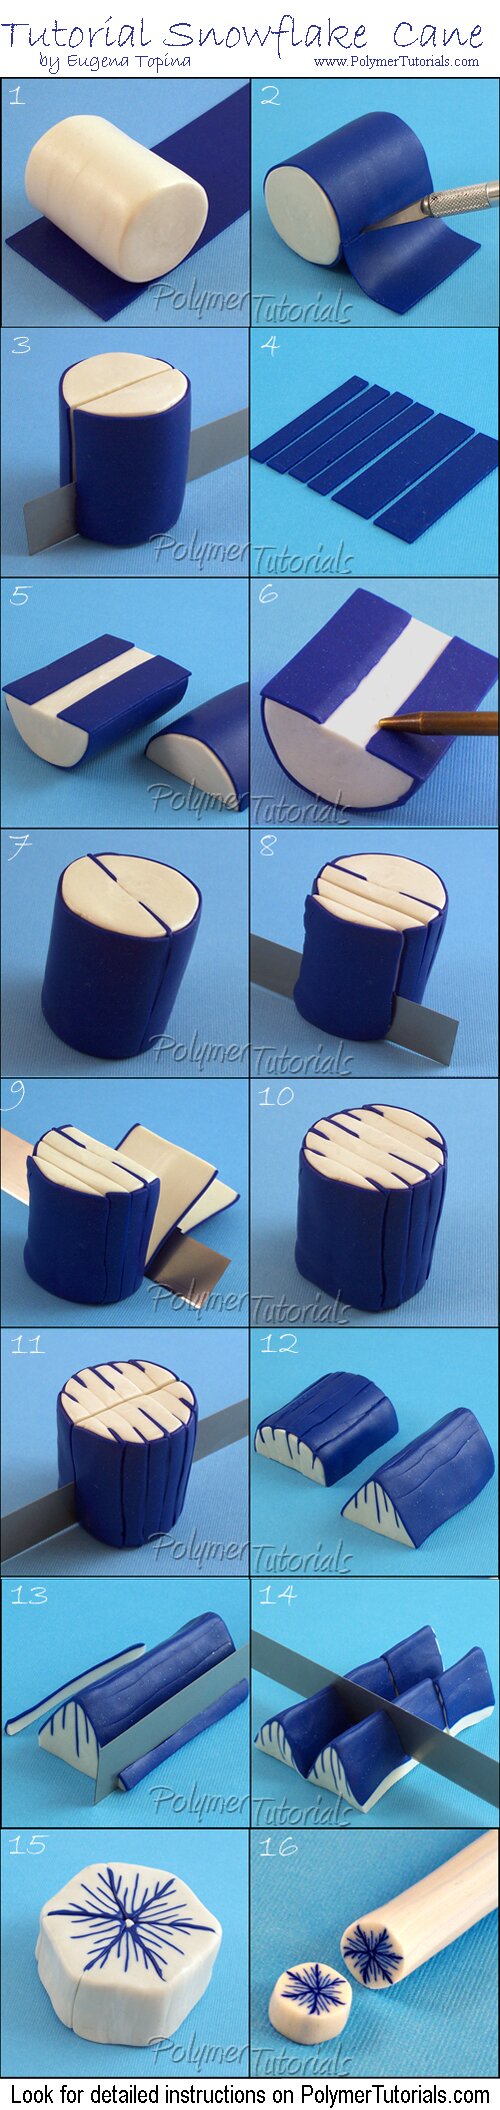 Image for Free Polymer Clay Tutorial Snowflake Cane